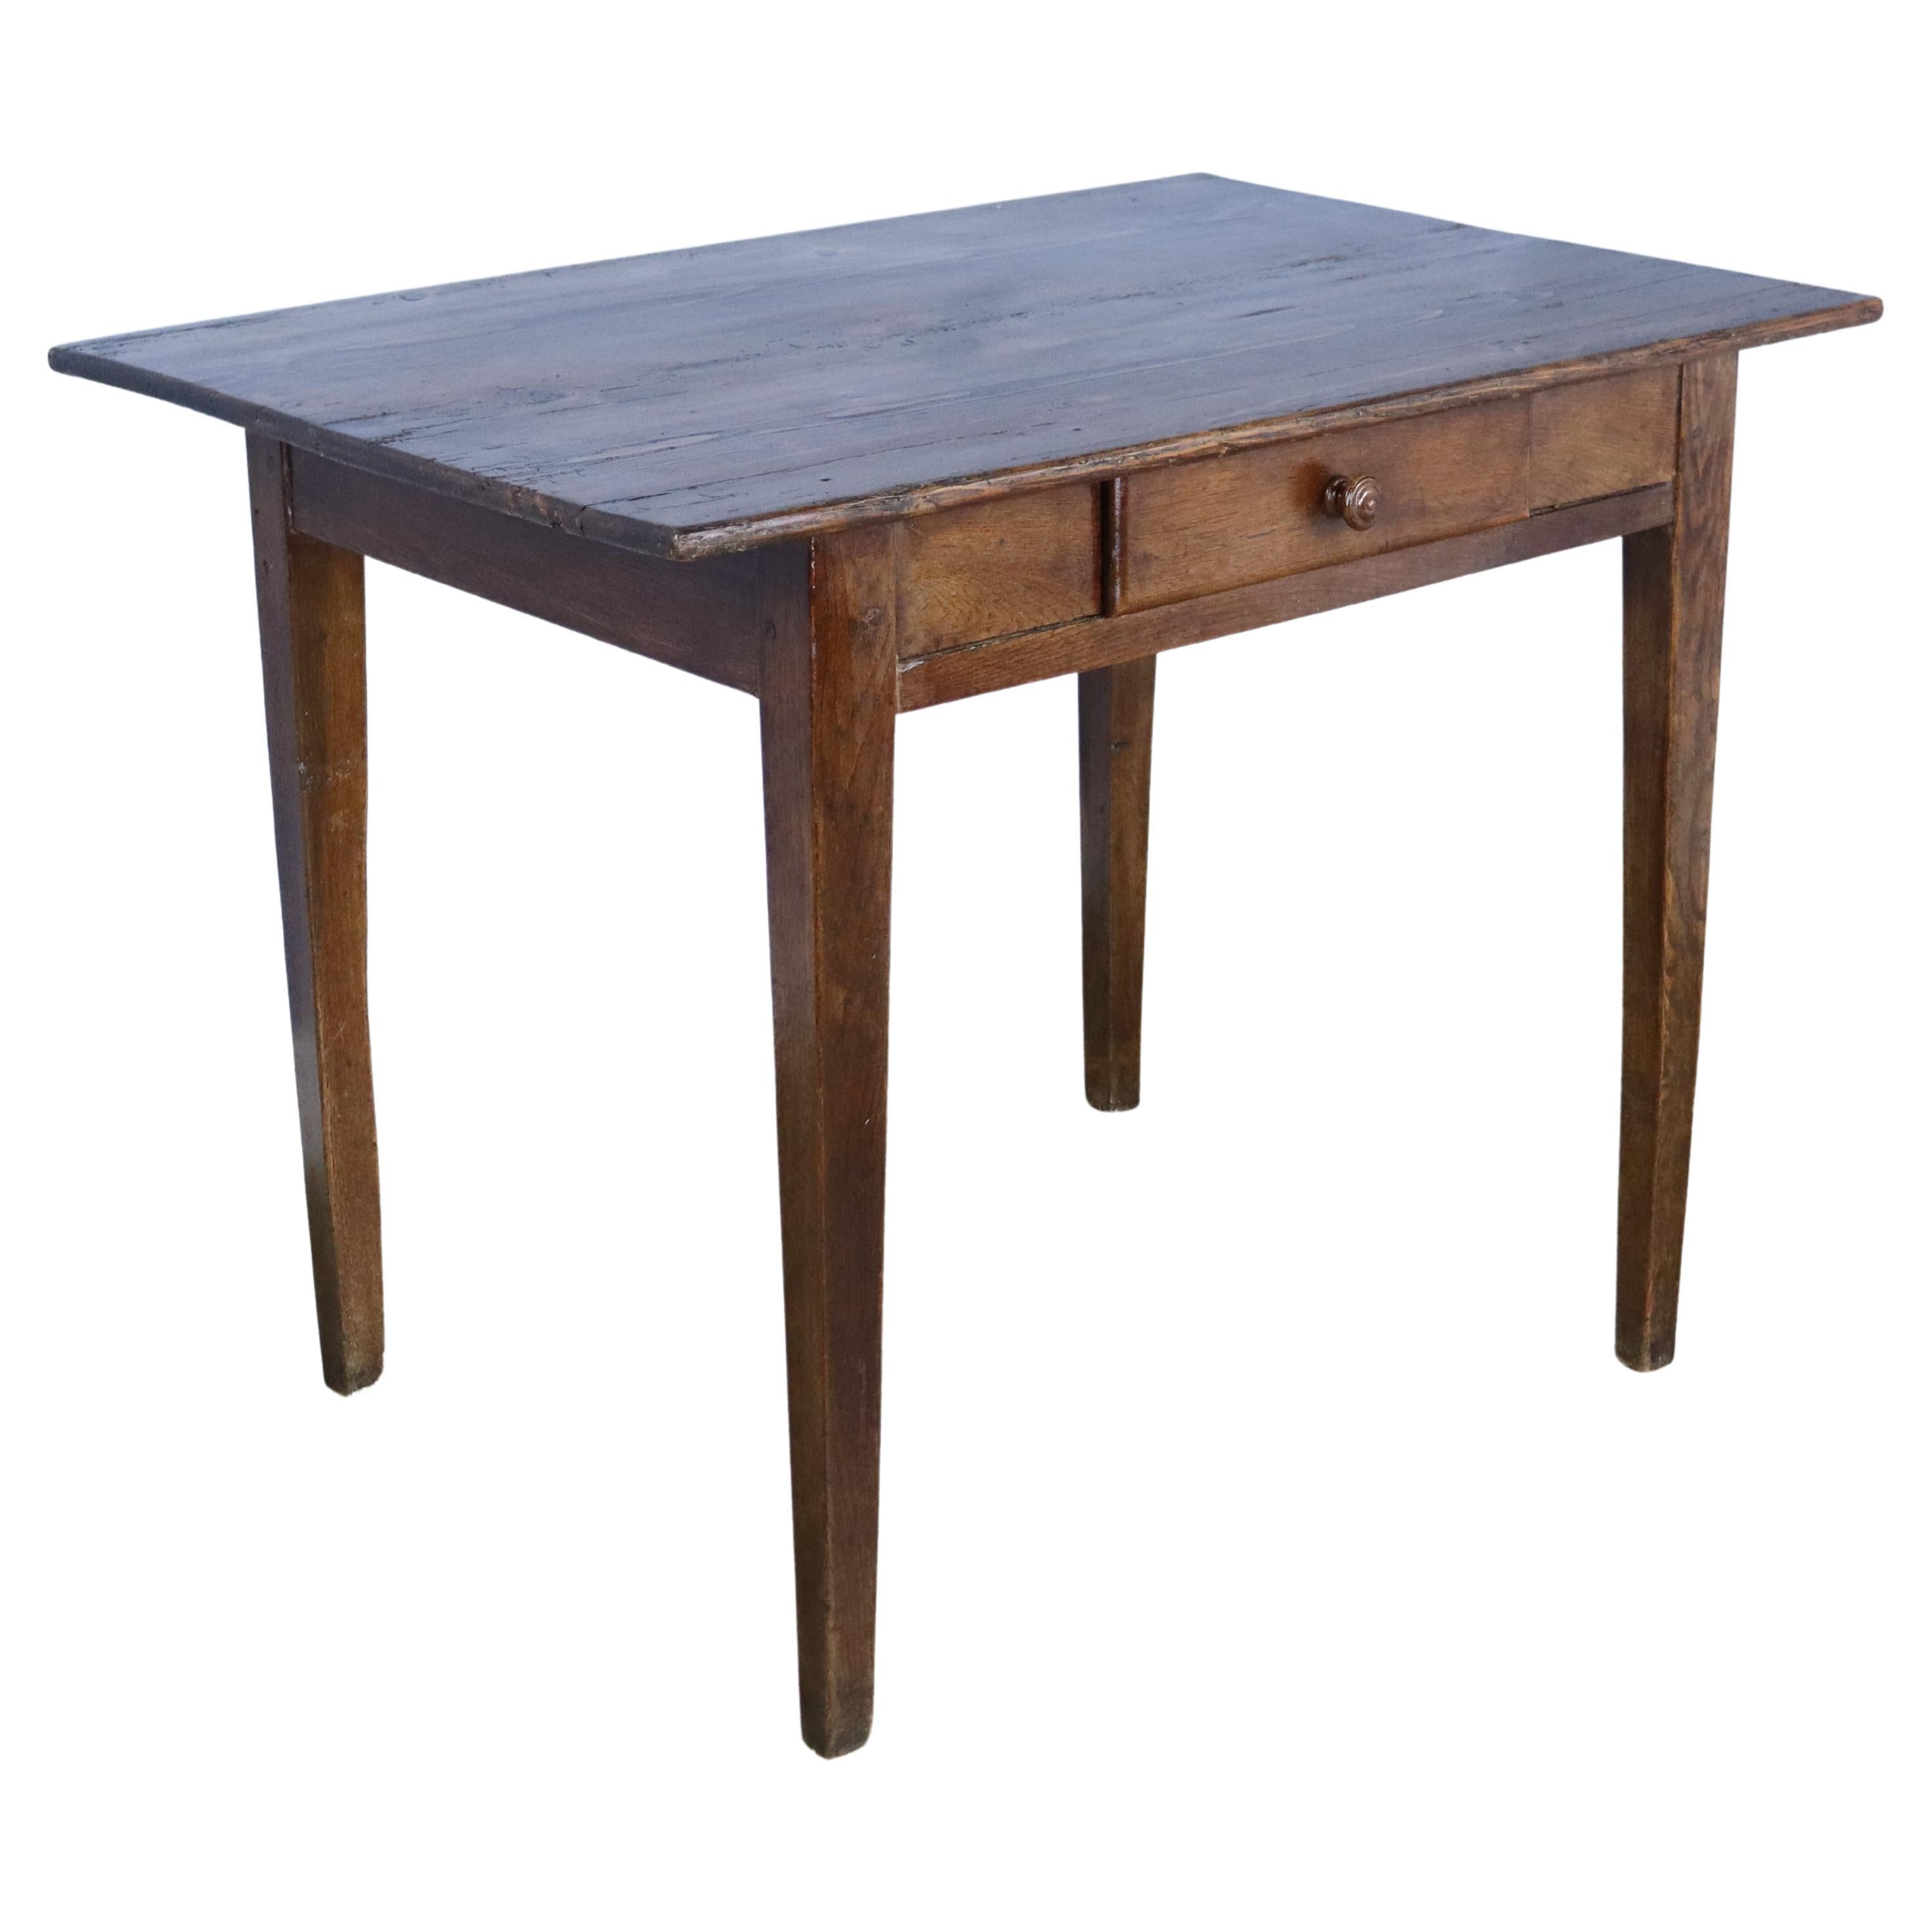 French Oak and Pine Country Side Table or Small Desk